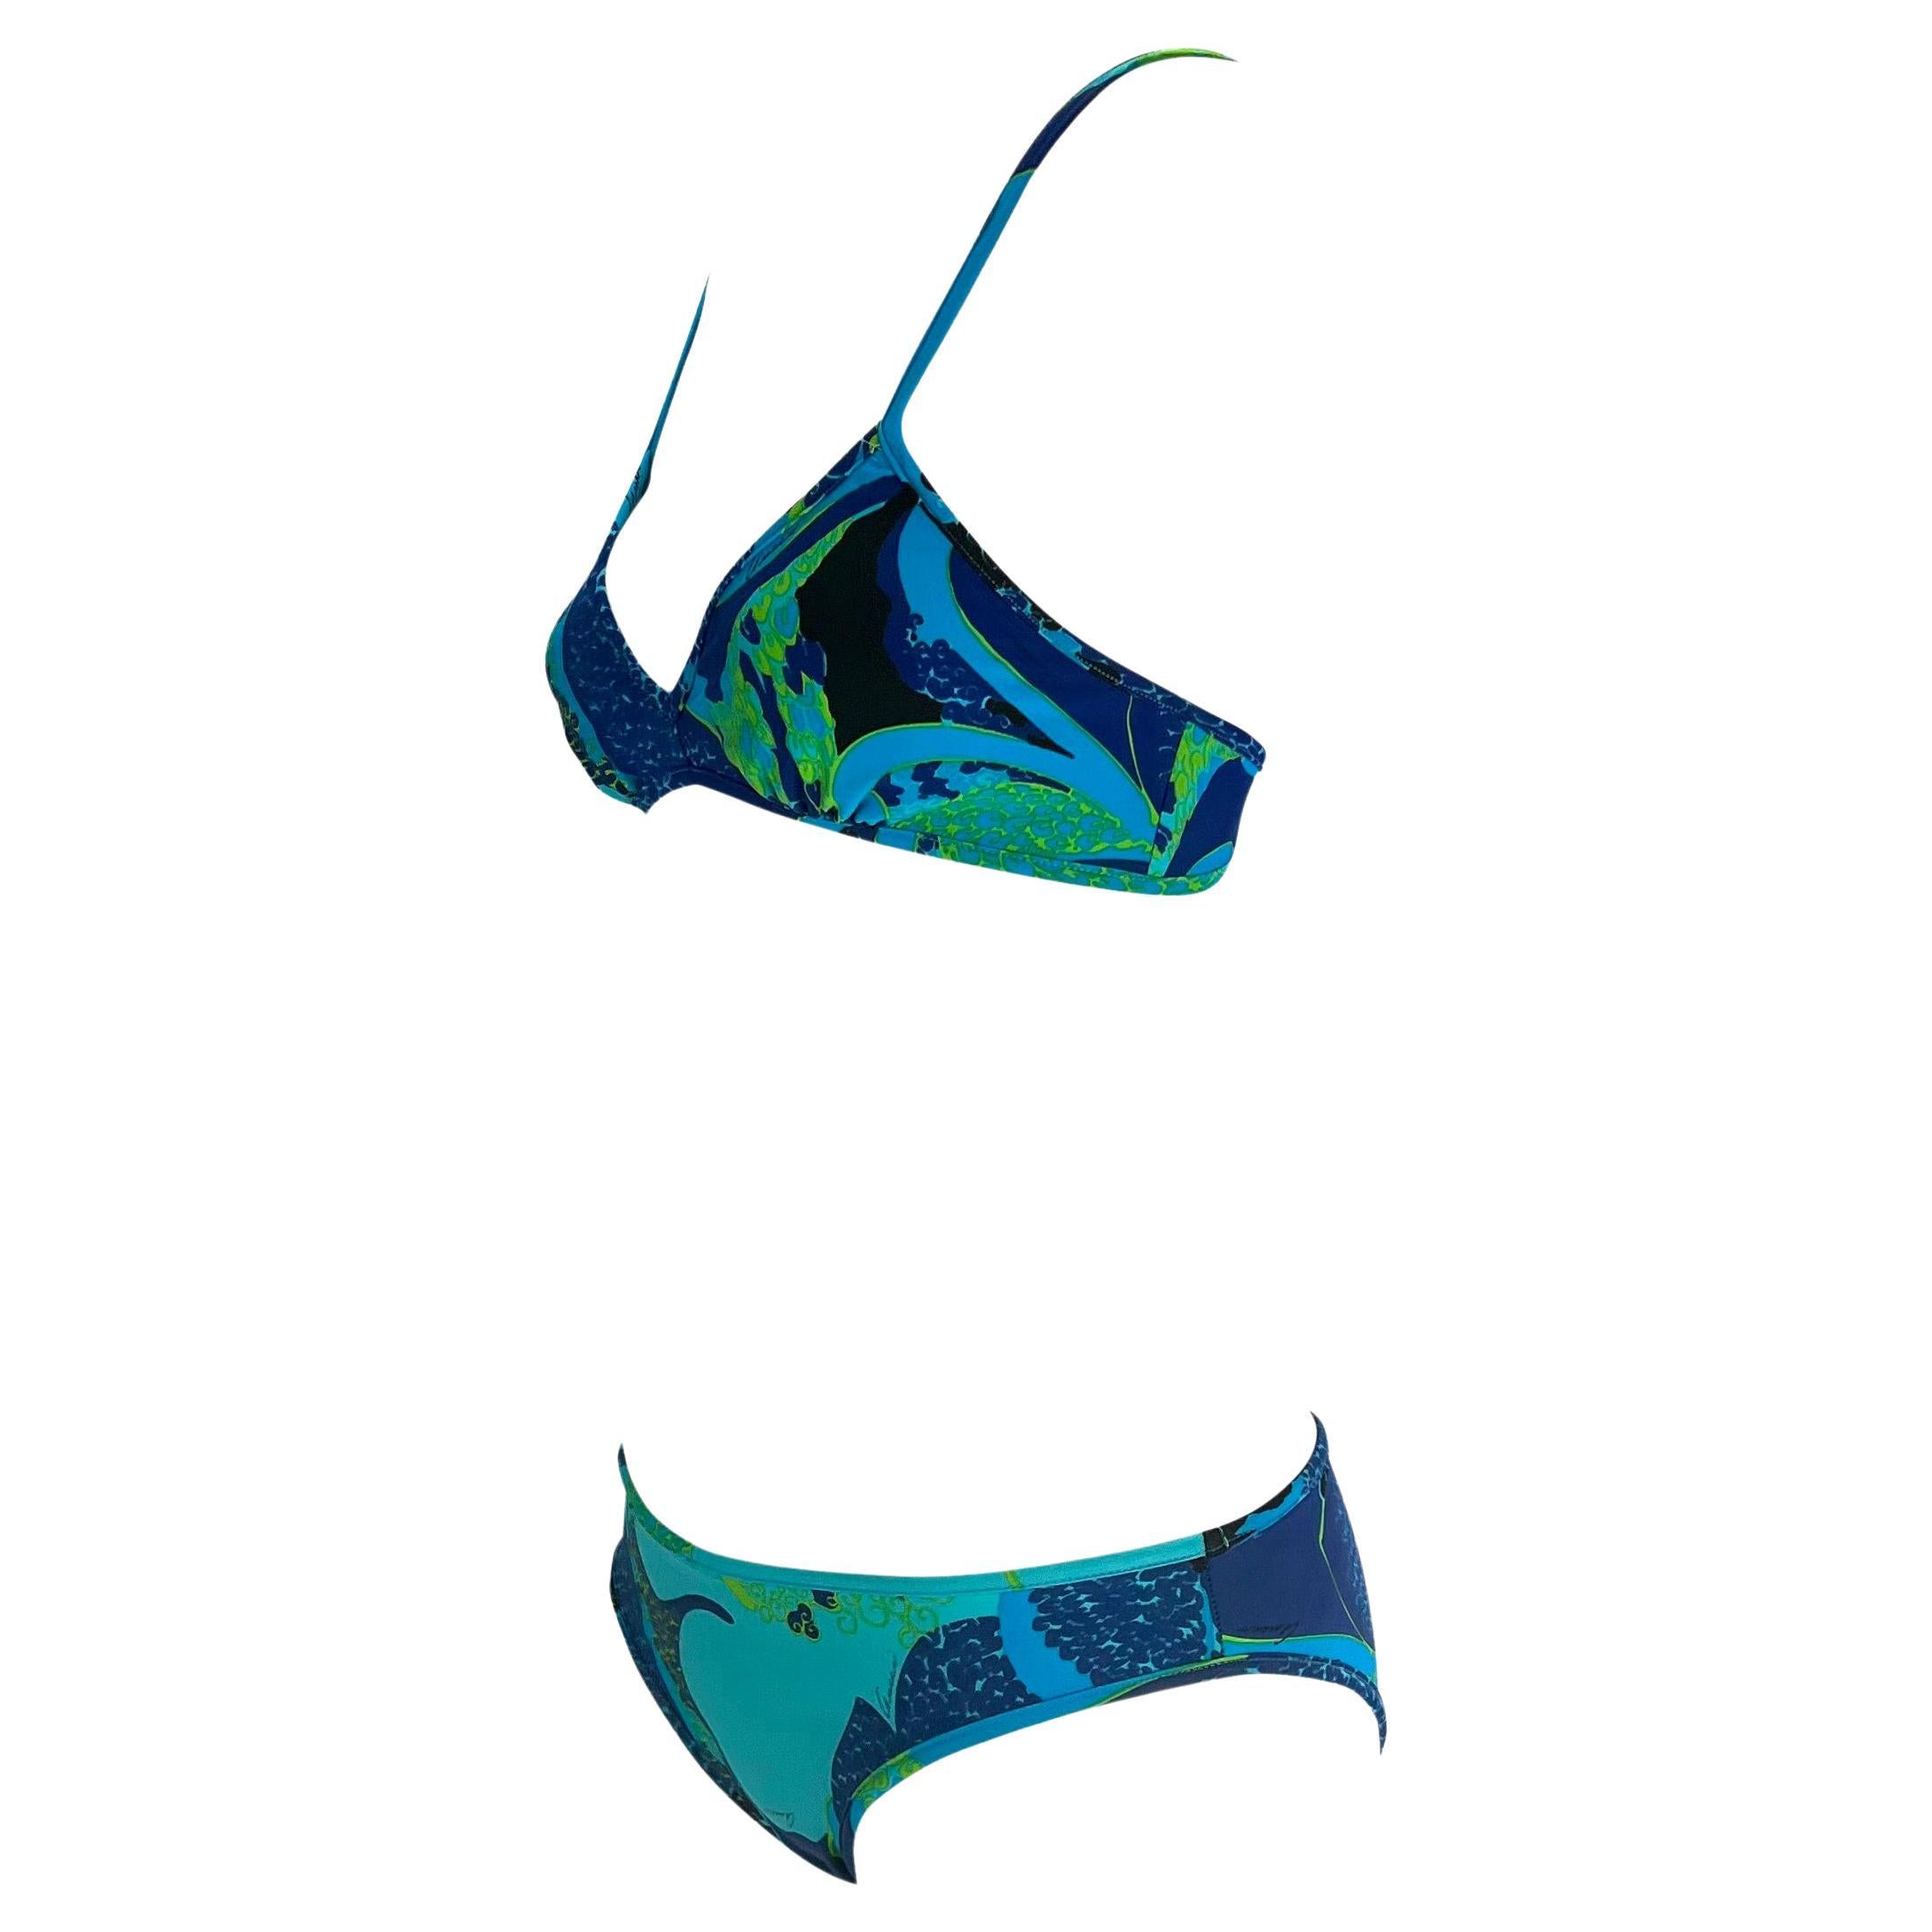 Presenting a blue 'acid flower' print Gucci bikini, designed by Tom Ford. From the Spring/Summer 1999 collection, this set is comprised of a triangle style top and hipster style shorts. This bikini set from Tom Ford's famous 'Las Vegas hippy'